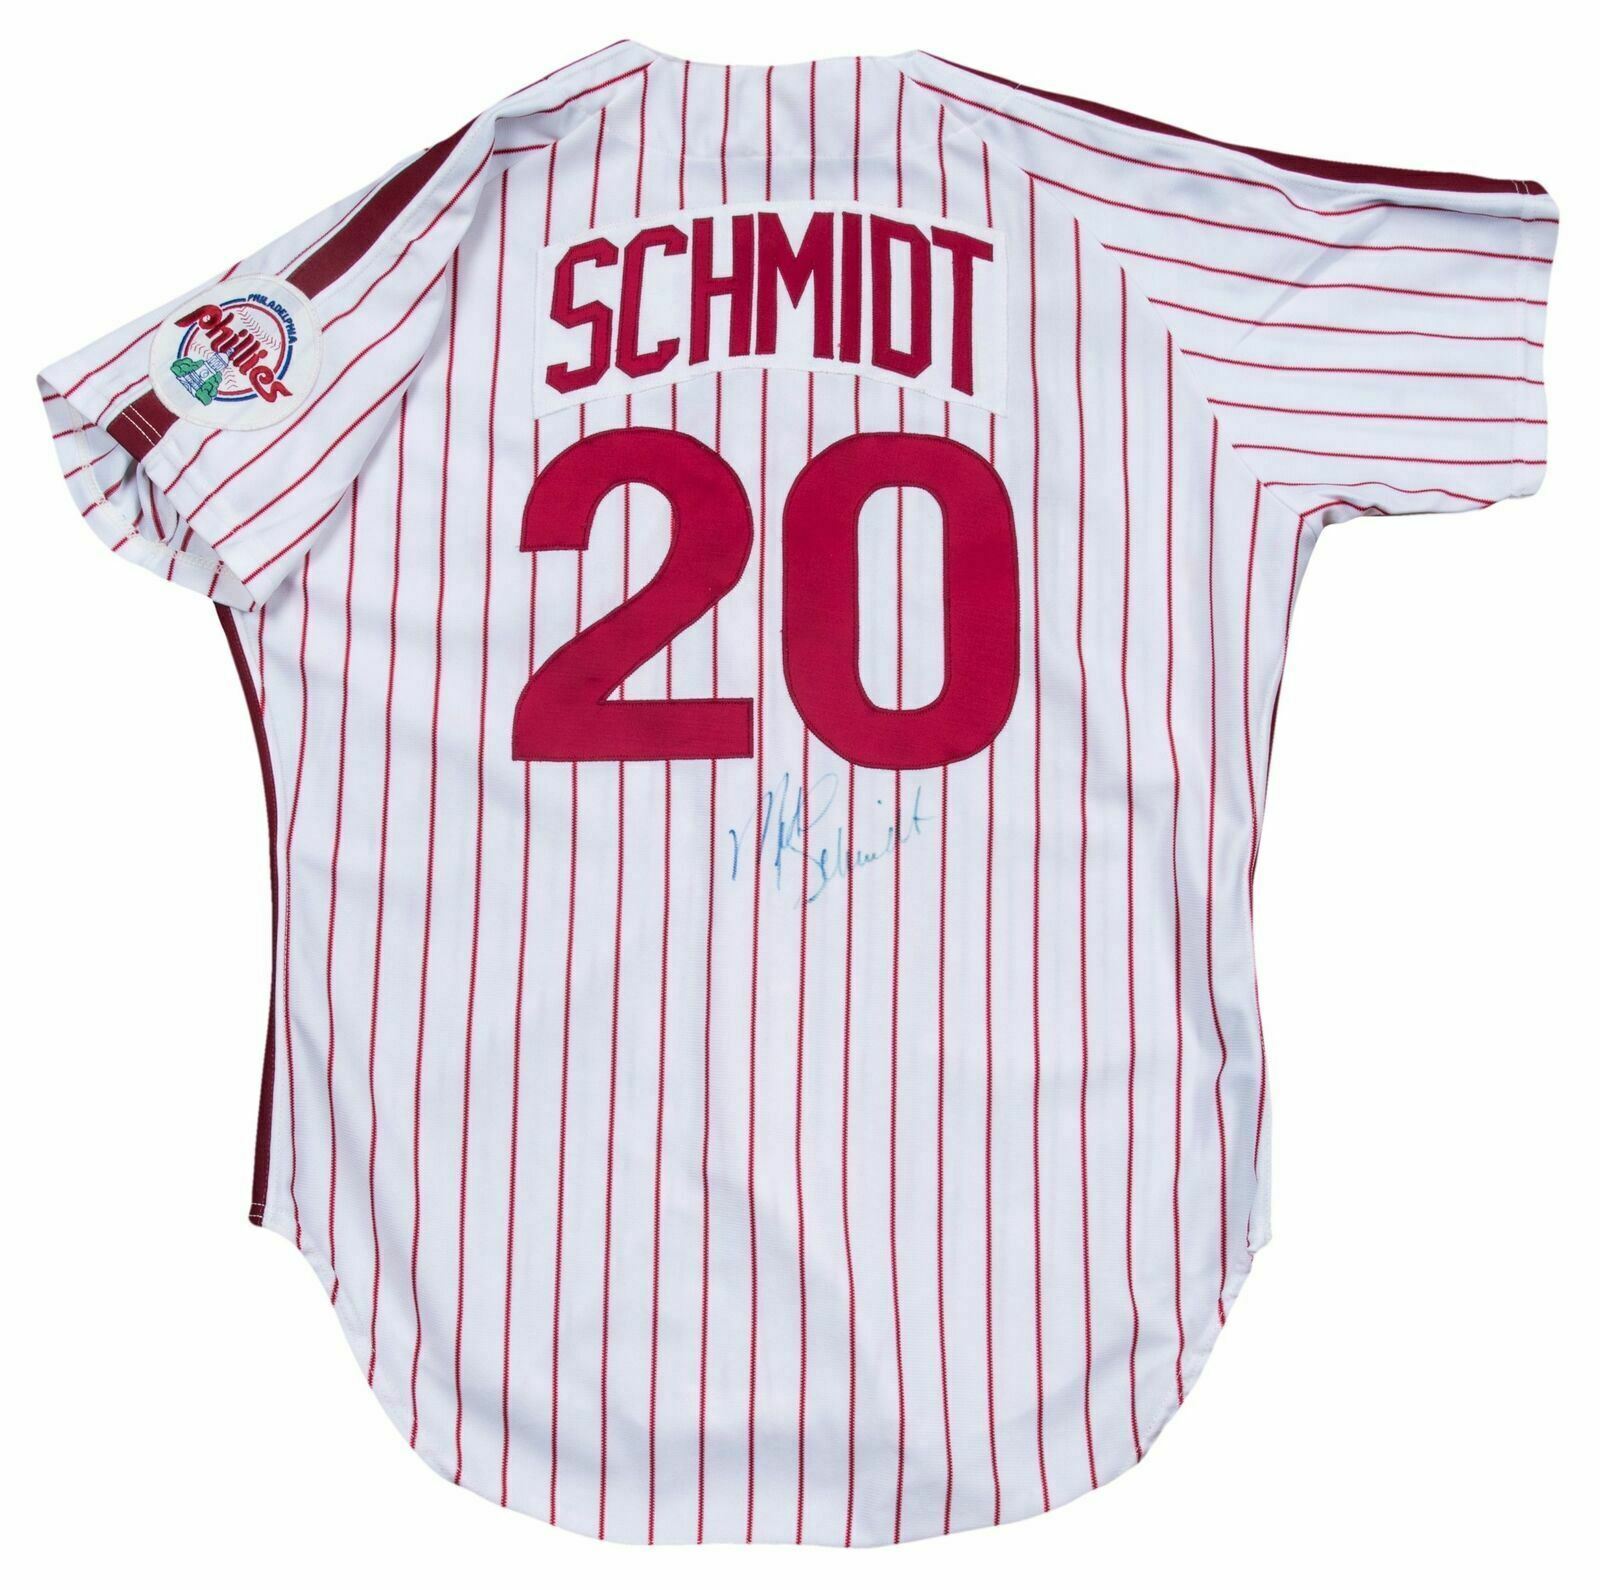 Vintage PHILLIES Jersey 70s 80s/ Mike Schmidt No. 20 Rawlings